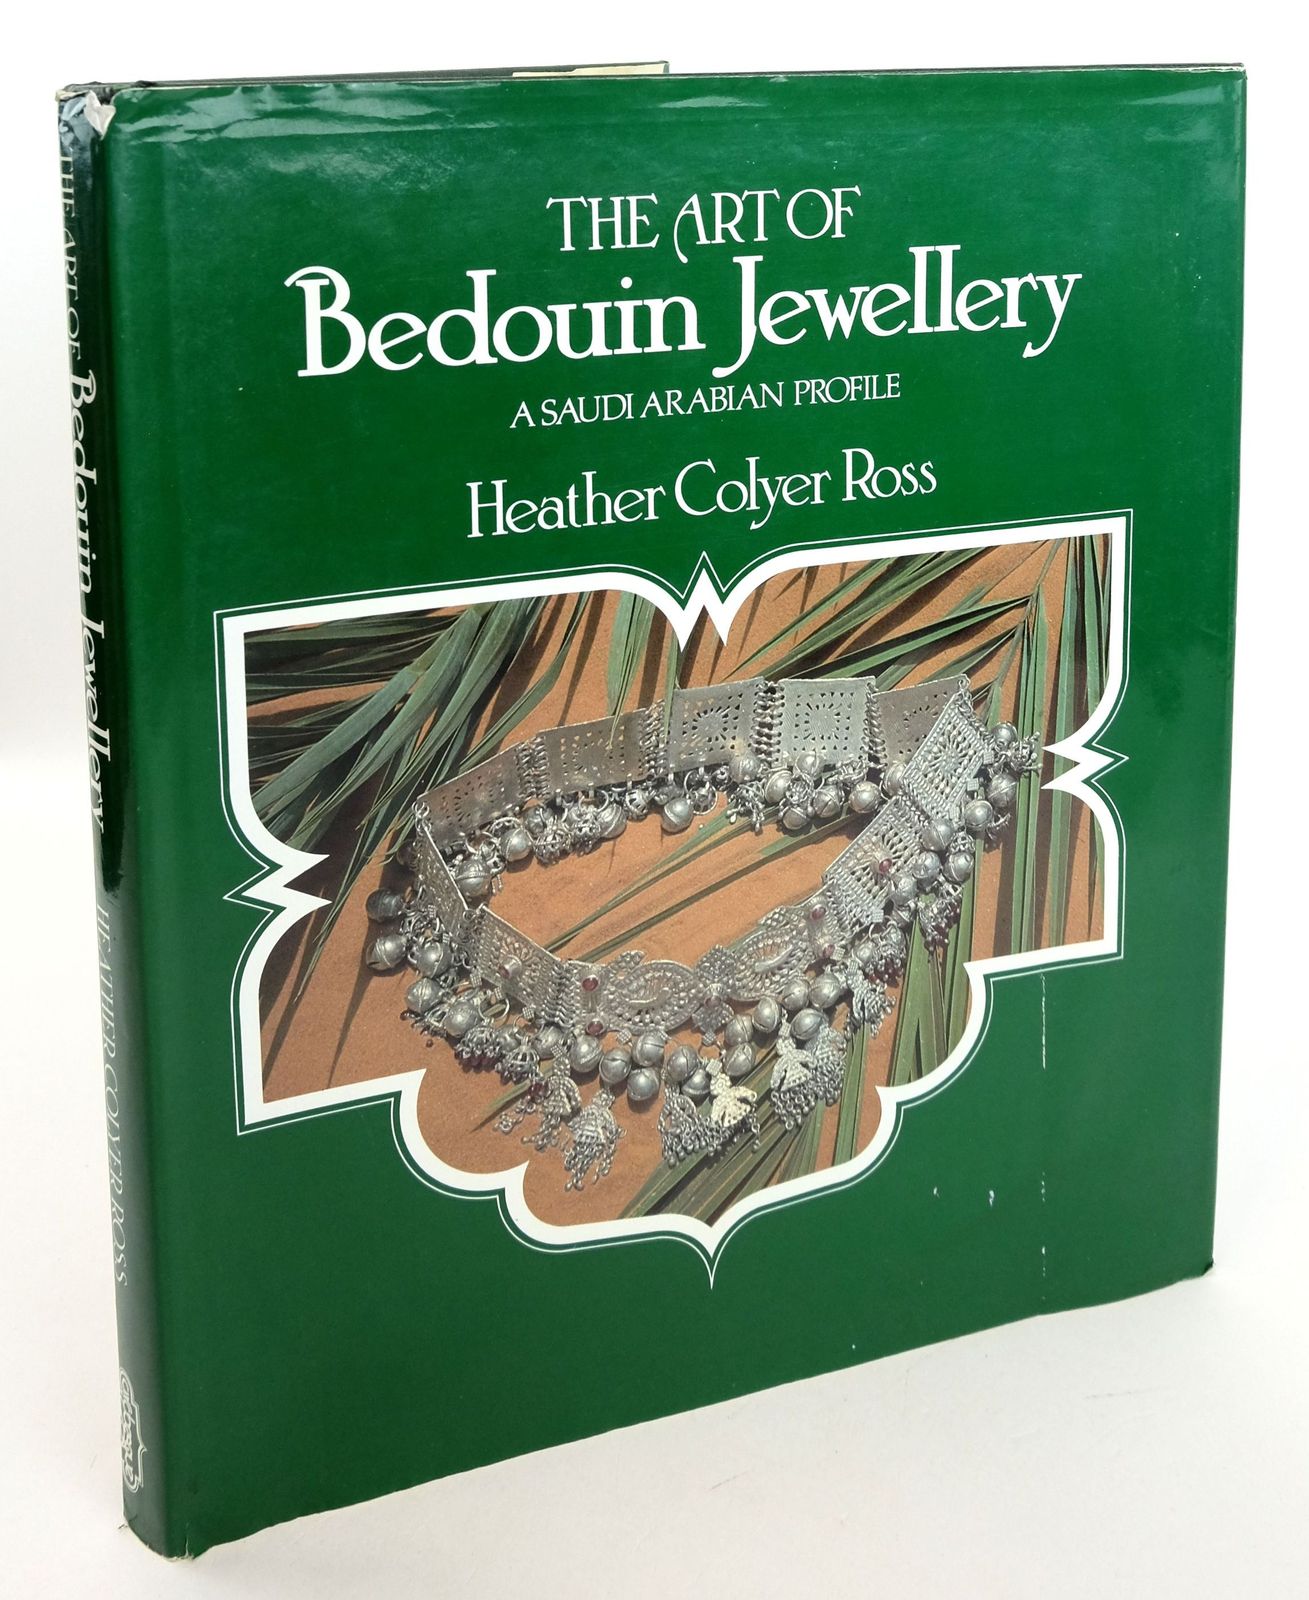 Photo of THE ART OF BEDOUIN JEWELLERY: A SAUDI ARABIAN PROFILE written by Ross, Heather Colyer published by Arabesque (STOCK CODE: 1819426)  for sale by Stella & Rose's Books